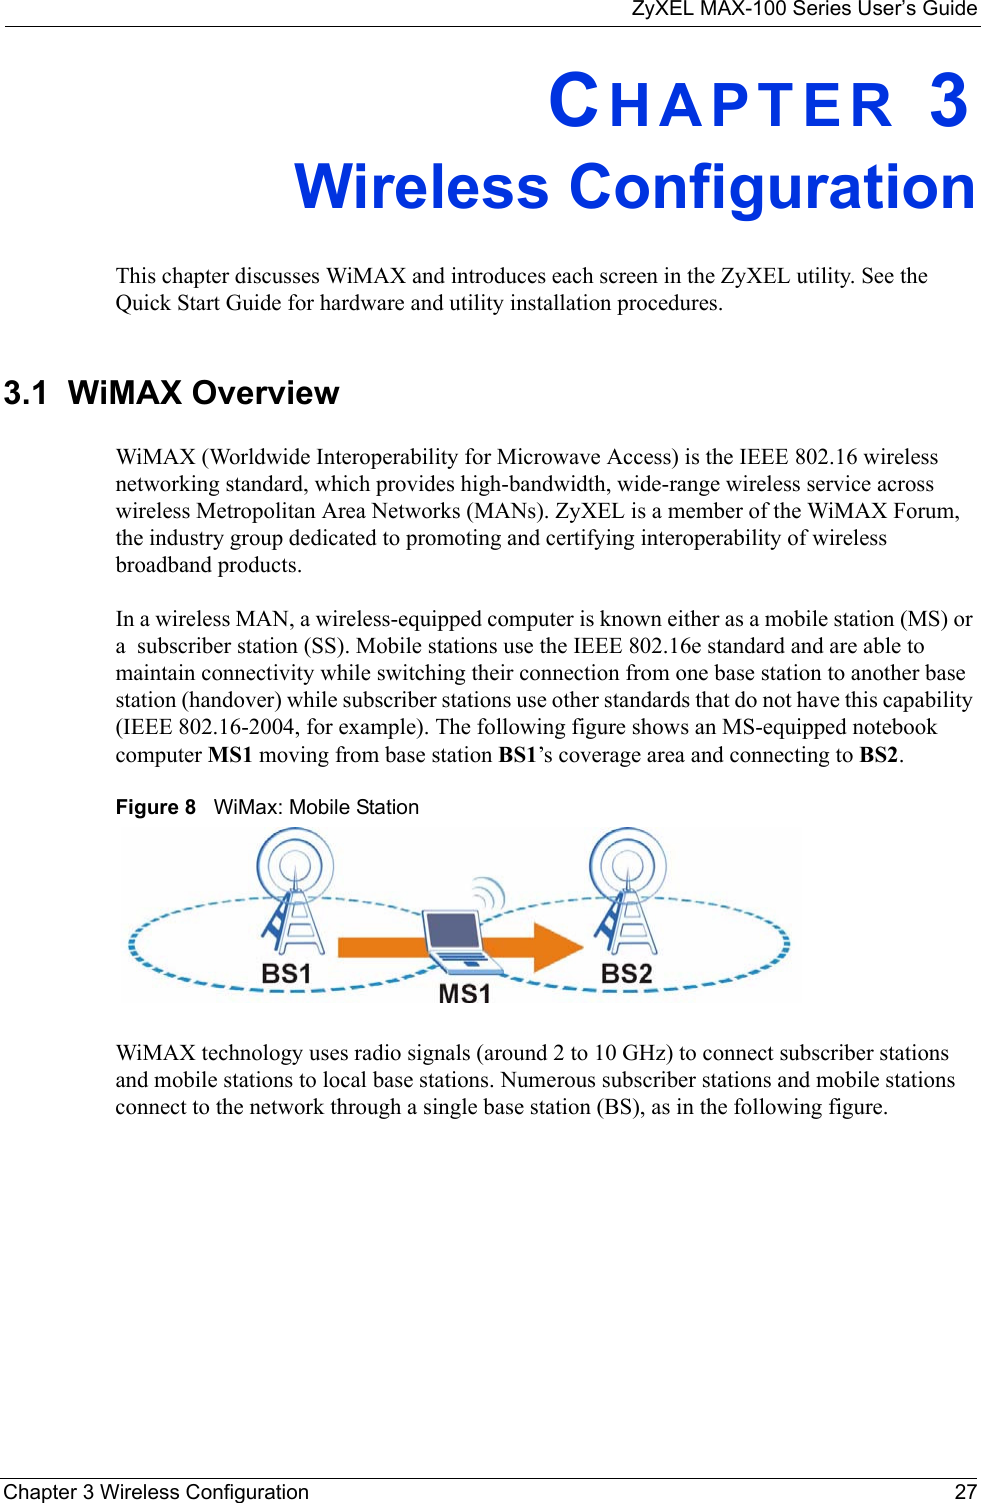 ZyXEL MAX-100 Series User’s GuideChapter 3 Wireless Configuration 27CHAPTER 3Wireless ConfigurationThis chapter discusses WiMAX and introduces each screen in the ZyXEL utility. See the Quick Start Guide for hardware and utility installation procedures.3.1  WiMAX OverviewWiMAX (Worldwide Interoperability for Microwave Access) is the IEEE 802.16 wireless networking standard, which provides high-bandwidth, wide-range wireless service across wireless Metropolitan Area Networks (MANs). ZyXEL is a member of the WiMAX Forum, the industry group dedicated to promoting and certifying interoperability of wireless broadband products.In a wireless MAN, a wireless-equipped computer is known either as a mobile station (MS) or a  subscriber station (SS). Mobile stations use the IEEE 802.16e standard and are able to maintain connectivity while switching their connection from one base station to another base station (handover) while subscriber stations use other standards that do not have this capability (IEEE 802.16-2004, for example). The following figure shows an MS-equipped notebook computer MS1 moving from base station BS1’s coverage area and connecting to BS2.Figure 8   WiMax: Mobile StationWiMAX technology uses radio signals (around 2 to 10 GHz) to connect subscriber stations and mobile stations to local base stations. Numerous subscriber stations and mobile stations connect to the network through a single base station (BS), as in the following figure. 